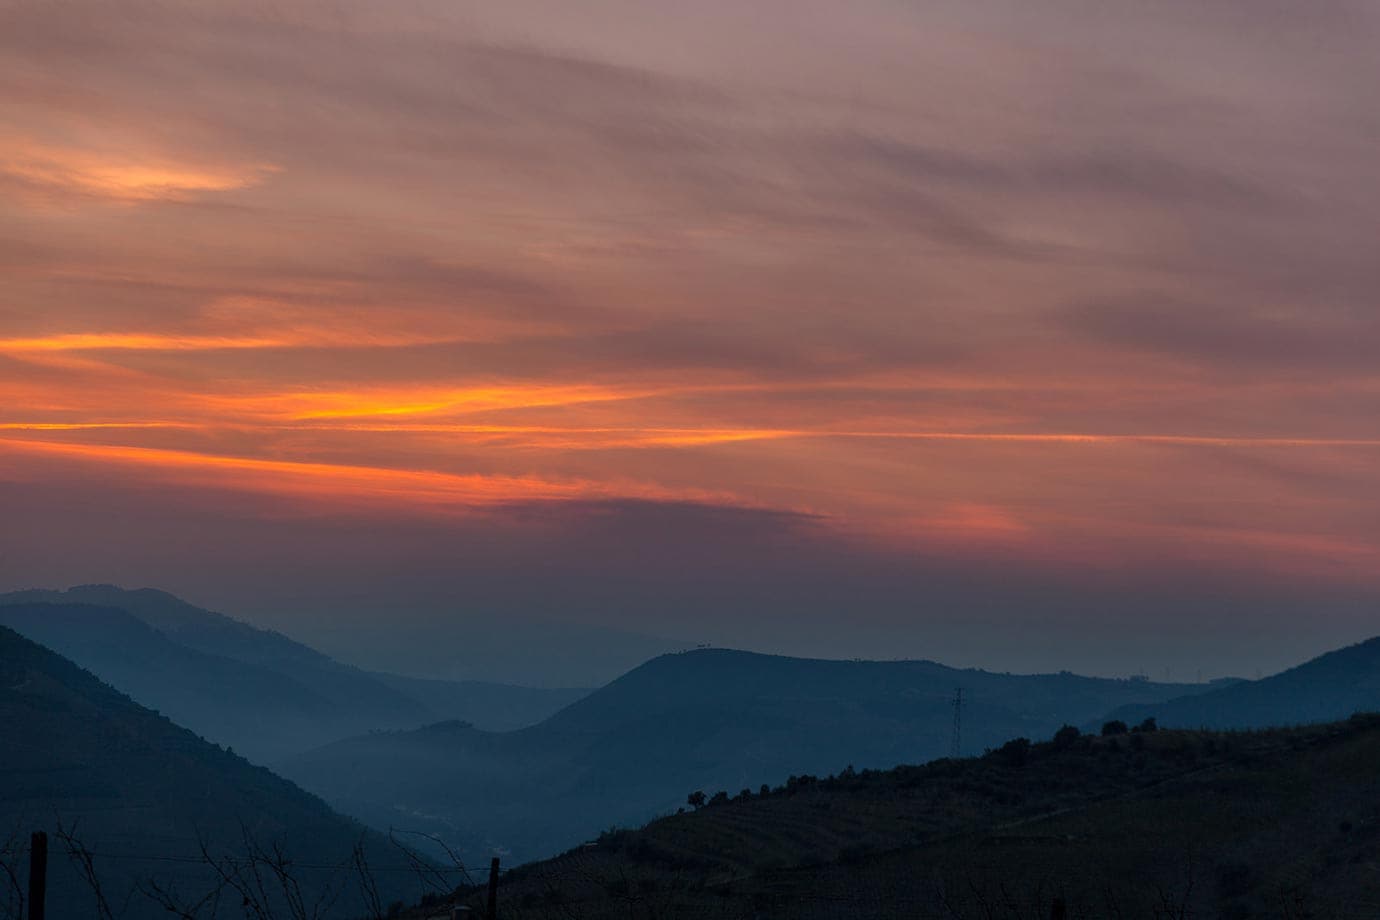 Sunset in the Douro Valley, Portugal